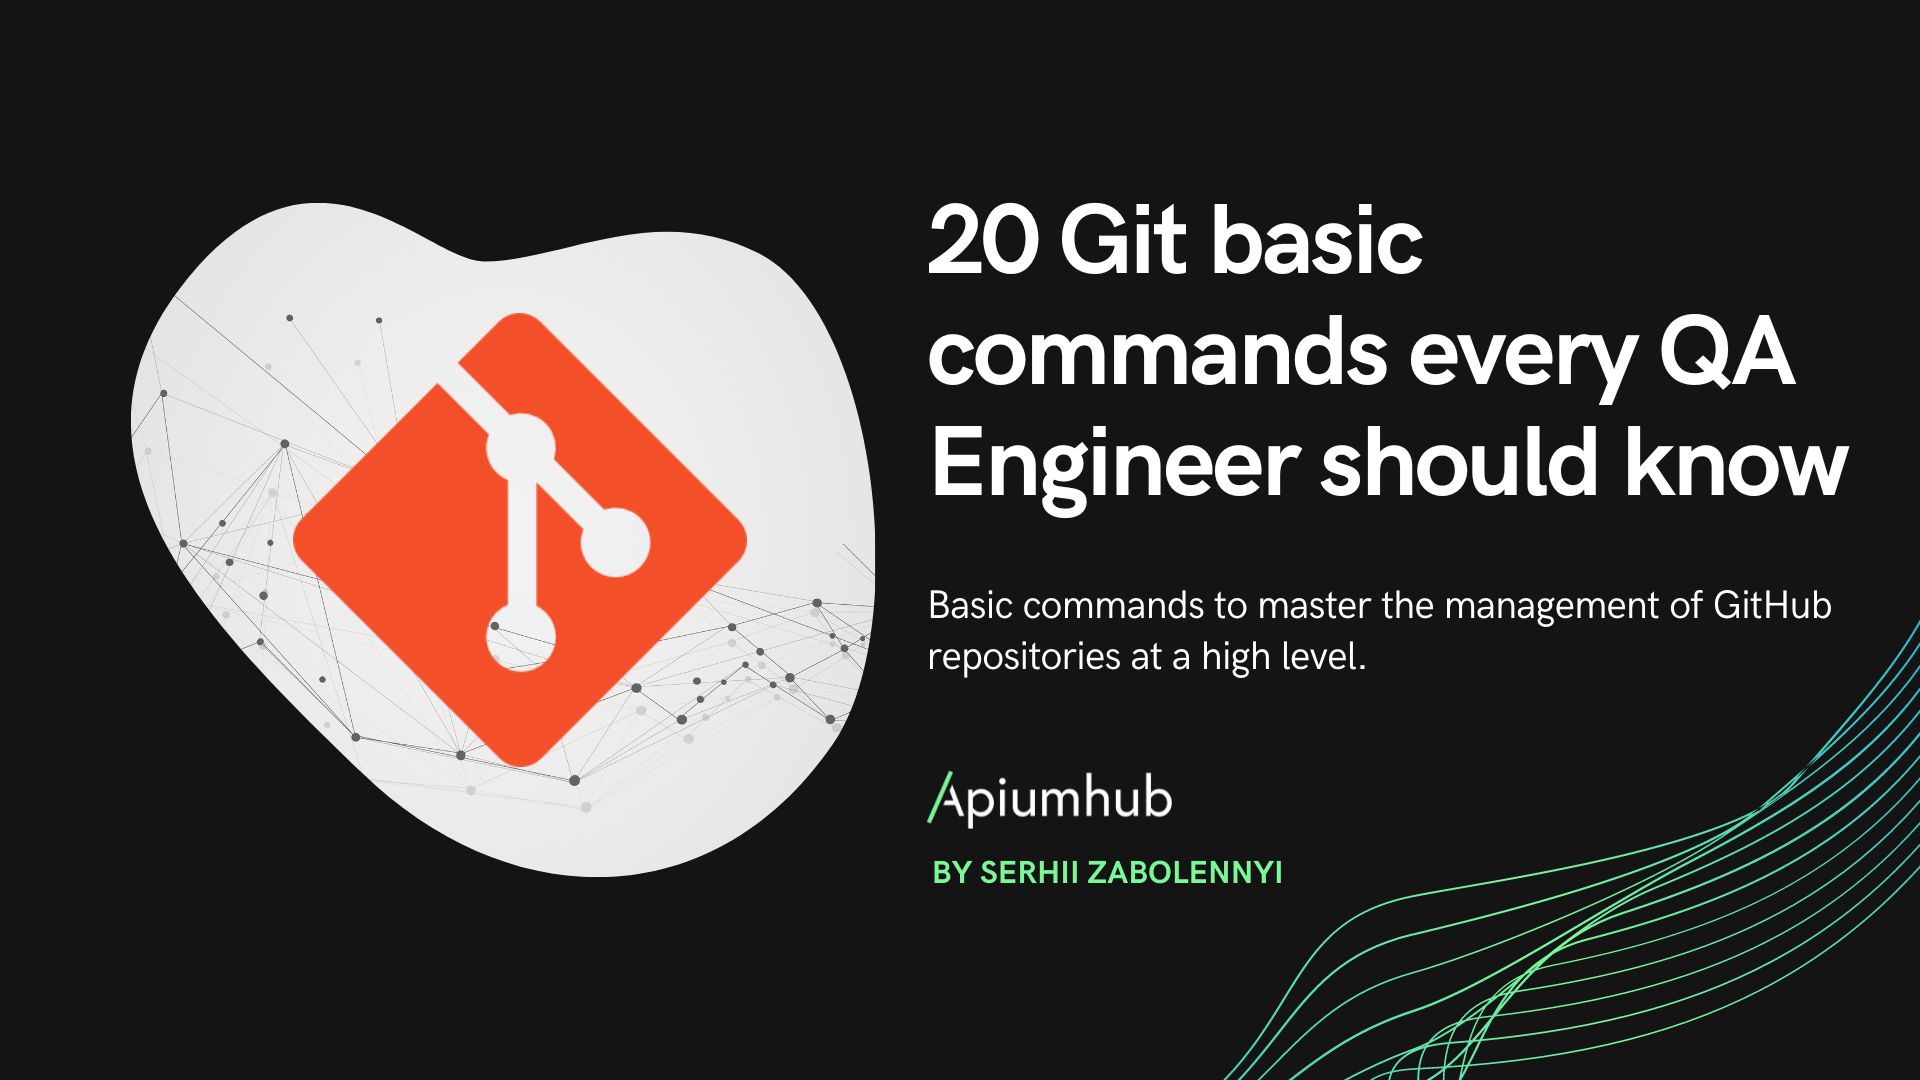 20 Git basic commands every QA Engineer should know